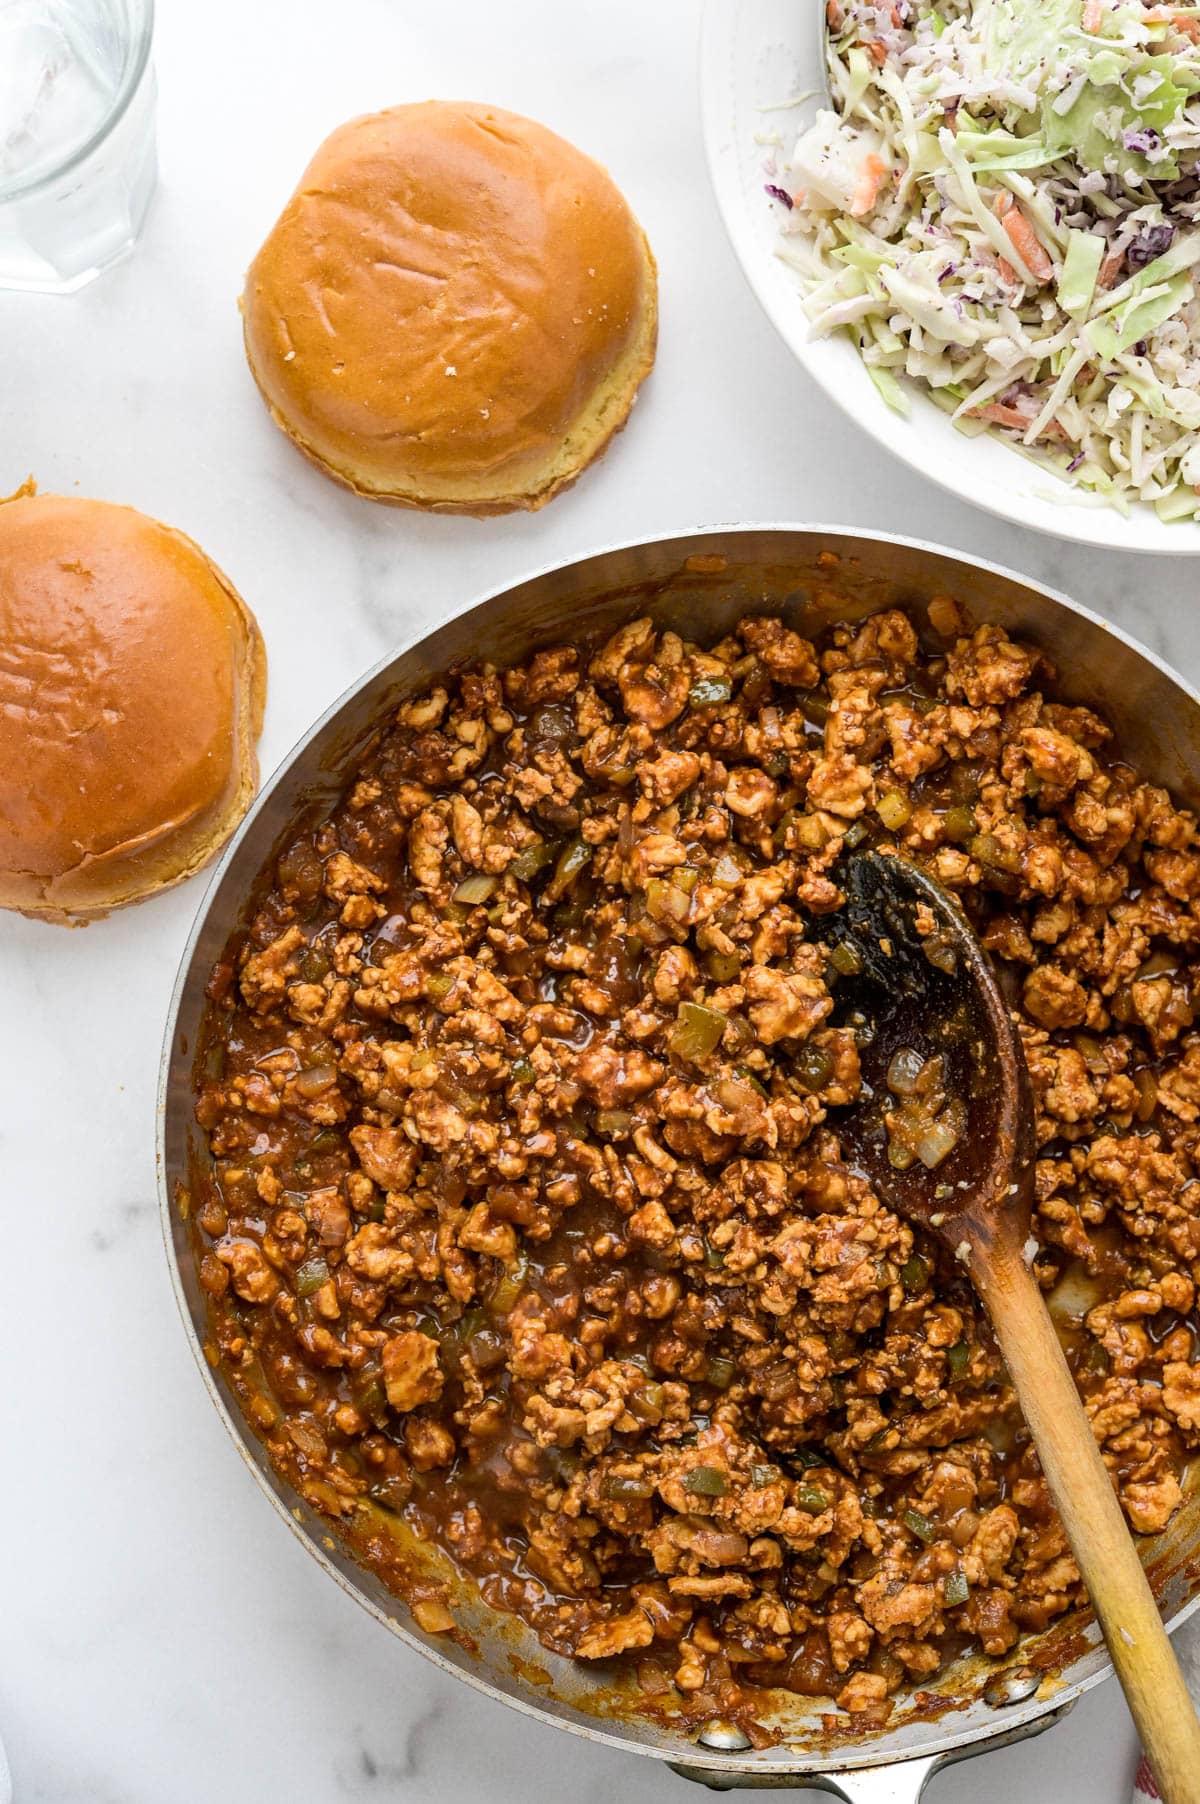 A skillet of the sloppy joes with ground turkey.